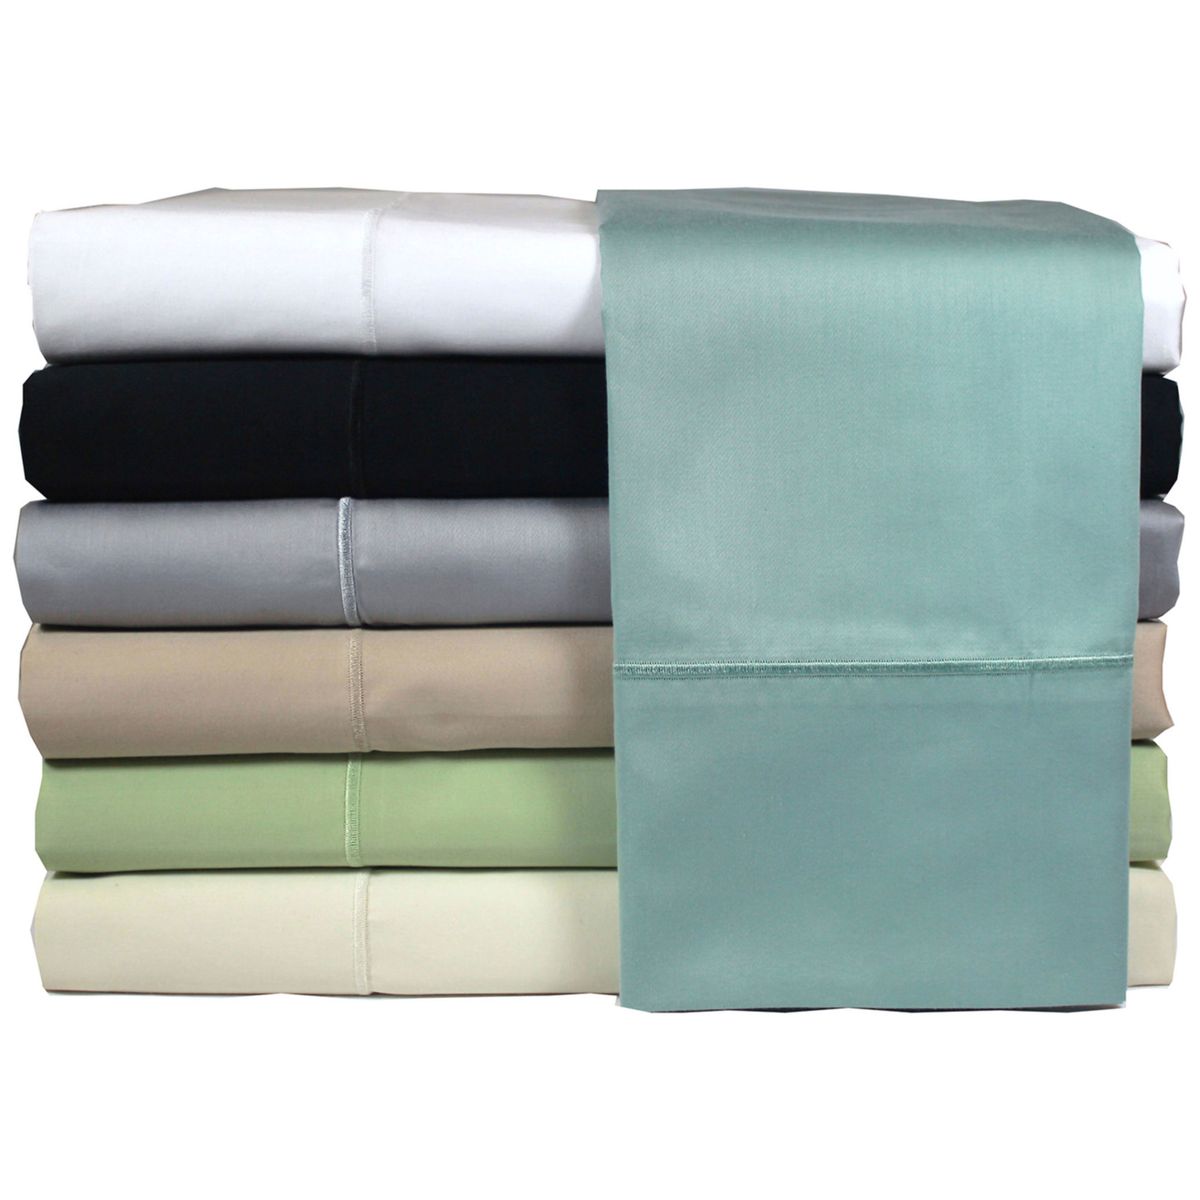 JCPenney Hotel 500 Thread Count Egyptian Cotton Sheet Set